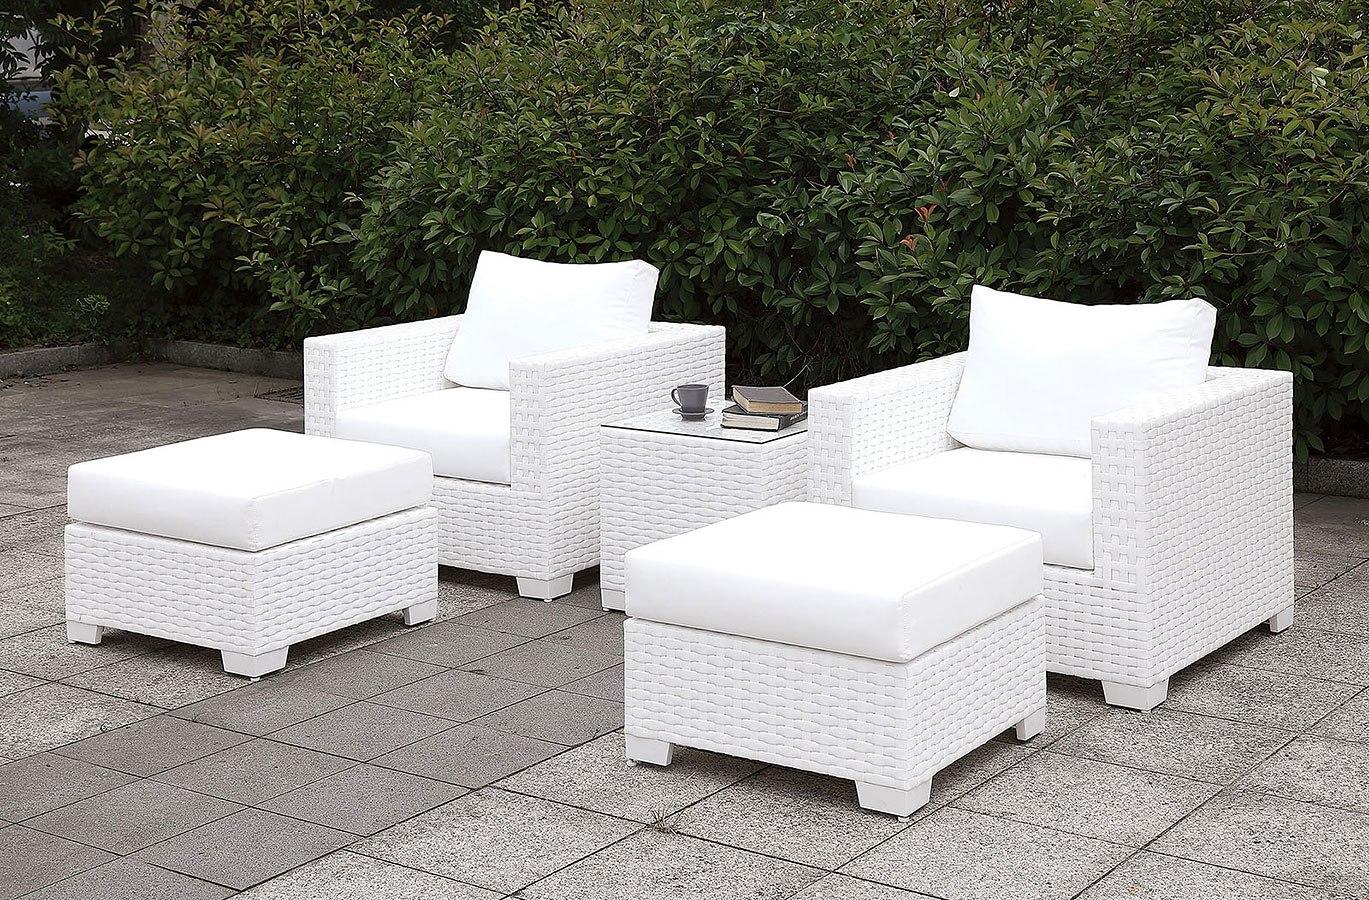 Contemporary Outdoor Sectional Set CM-OS2128WH-SET21 Somani CM-OS2128WH-SET21 in White Wicker